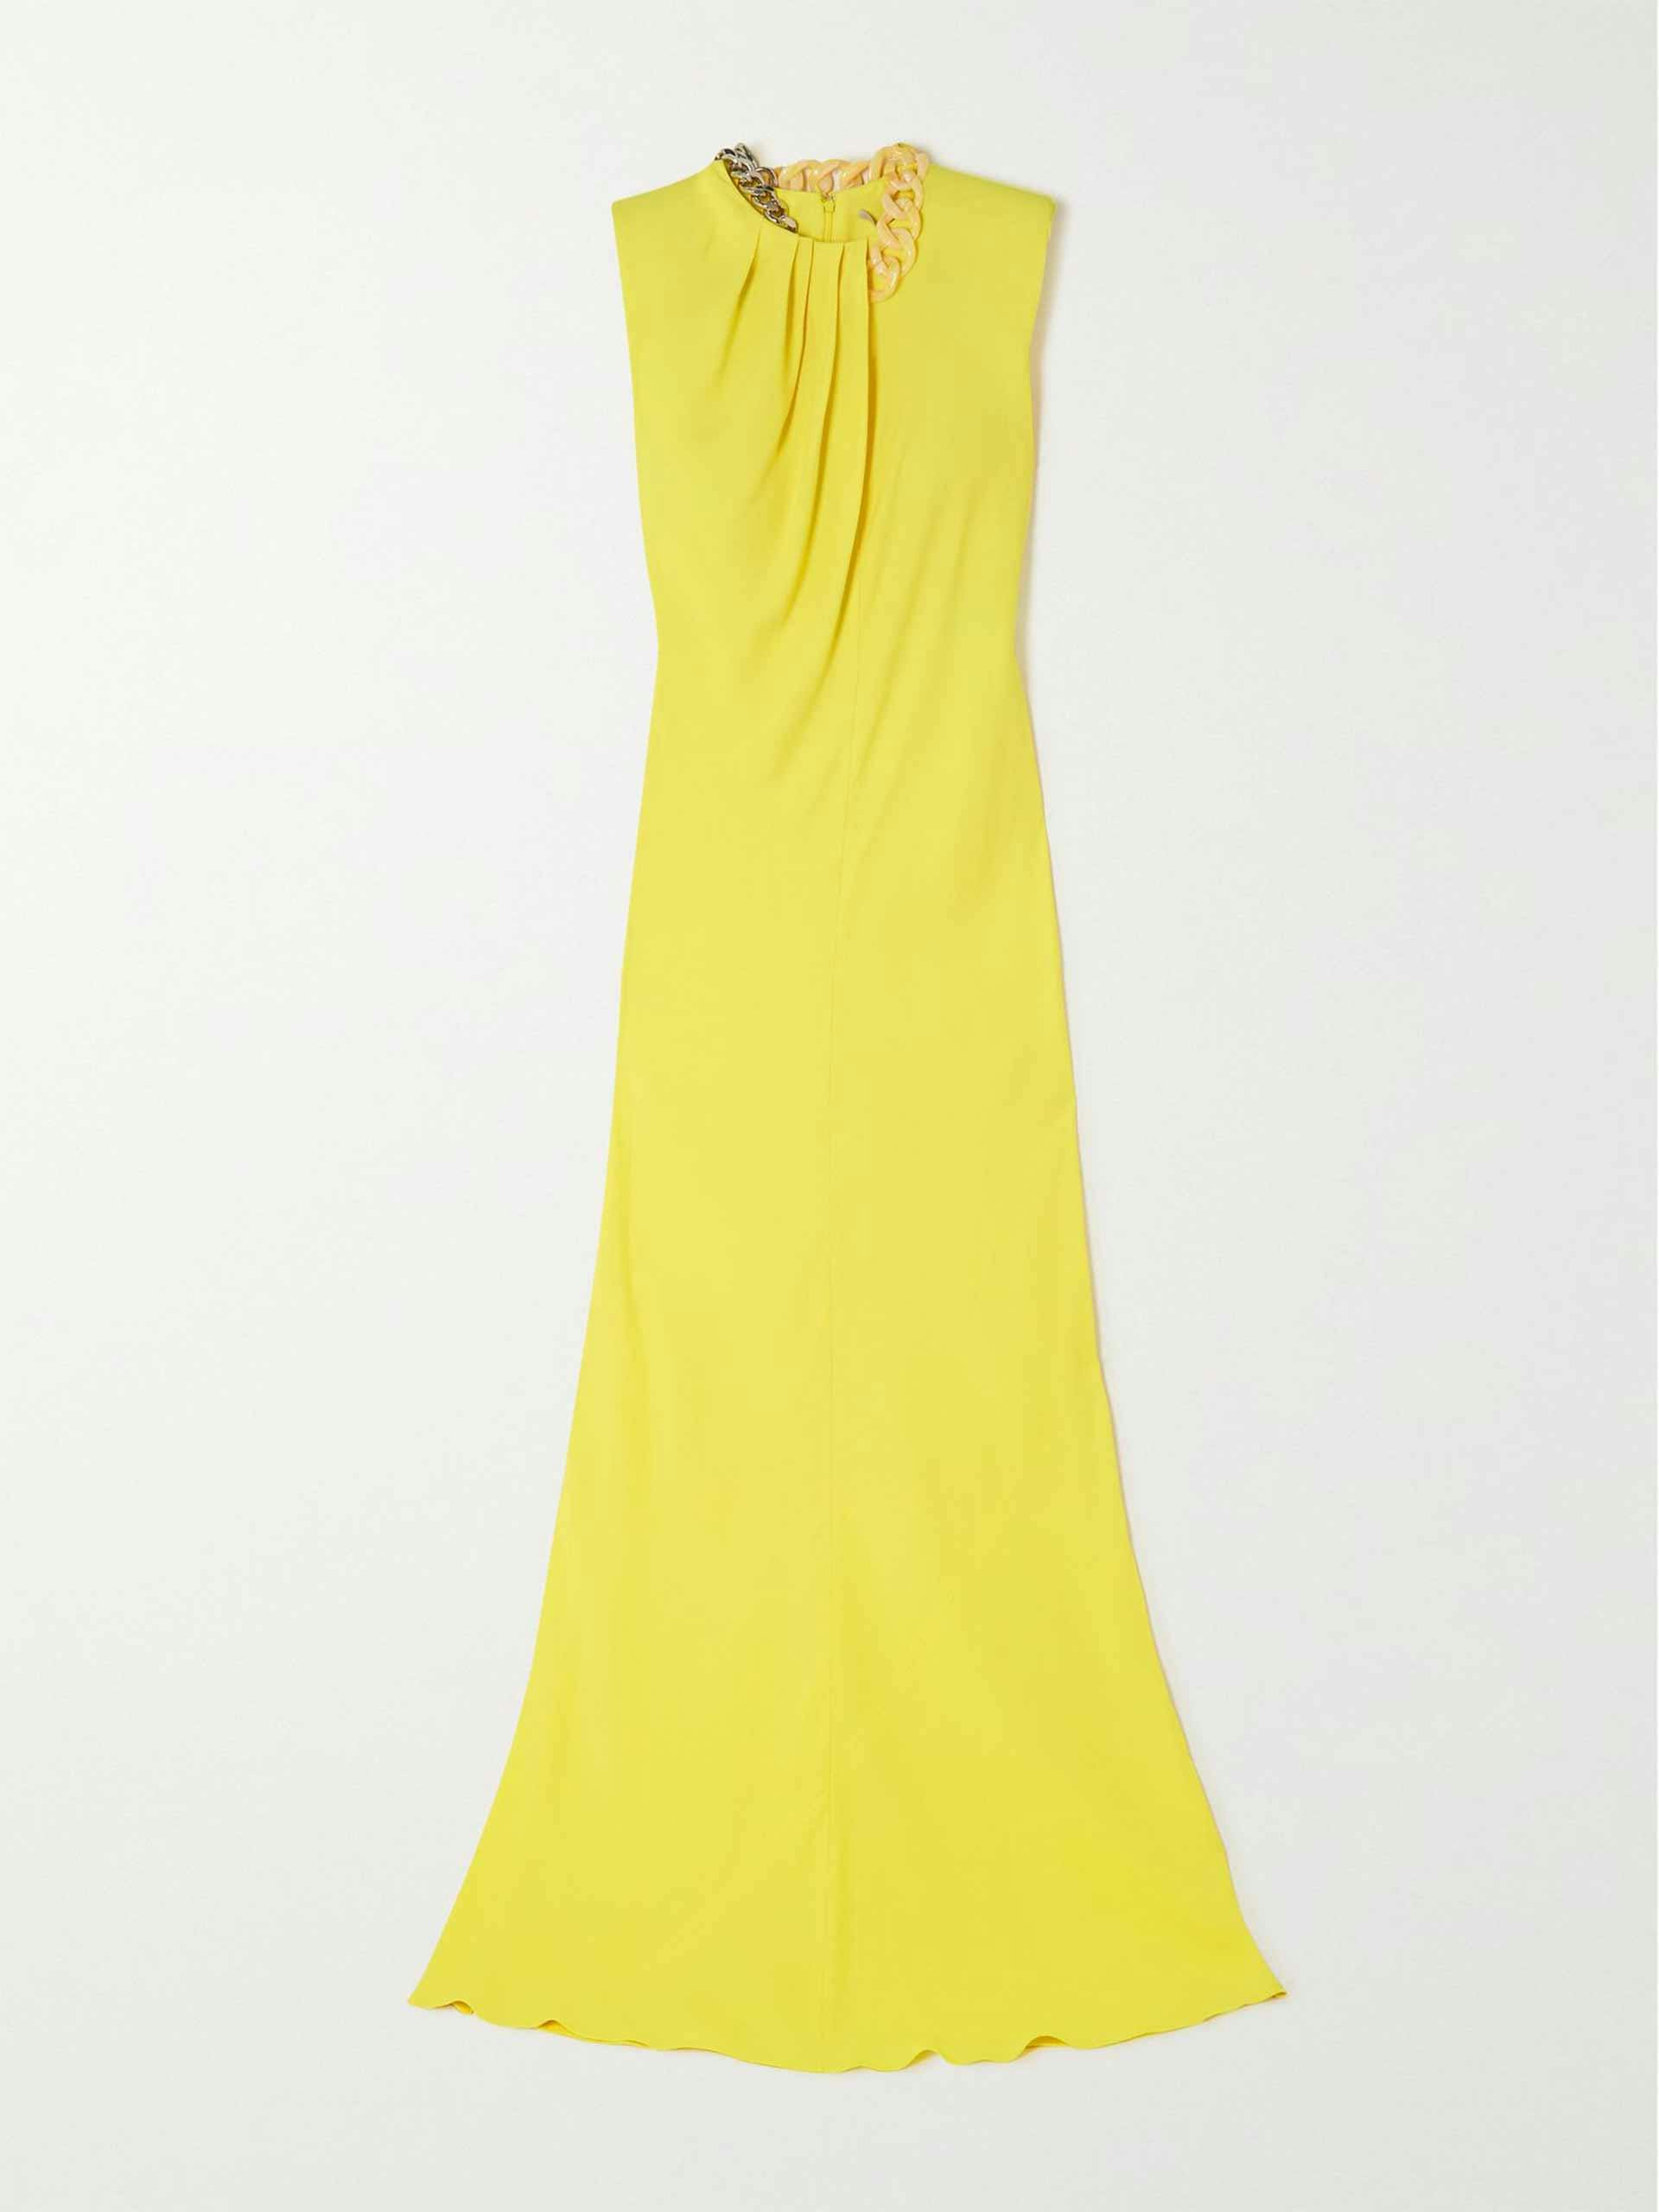 Chain embellished yellow gown